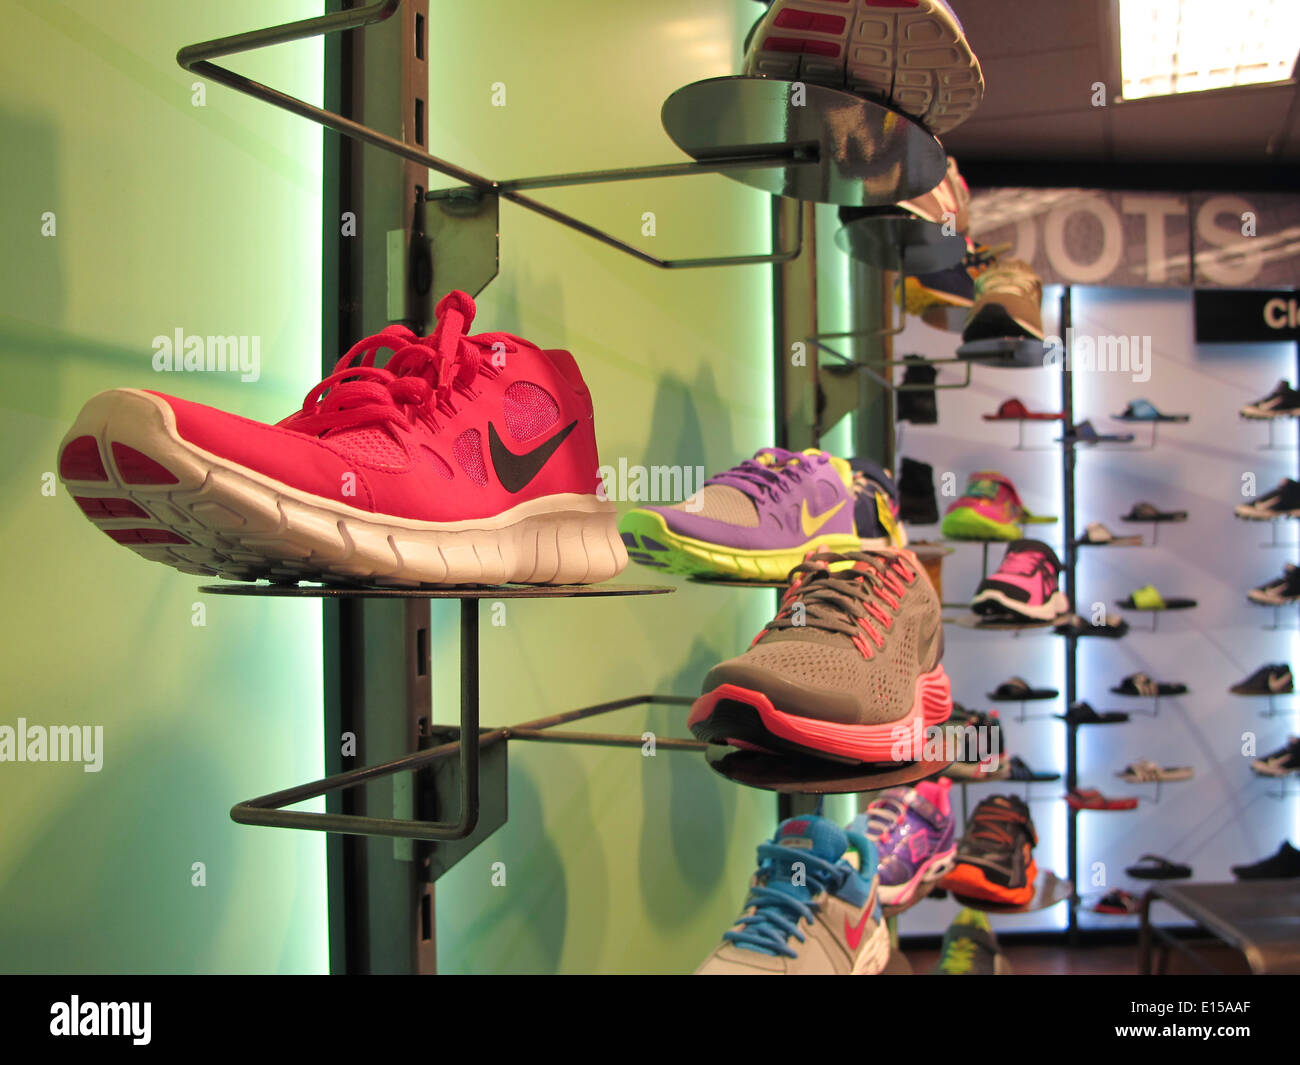 Athletic Footwear Wall with Nikes   with Swoosh Logo,, Modell's Sporting Goods Store Interior, NYC Stock Photo